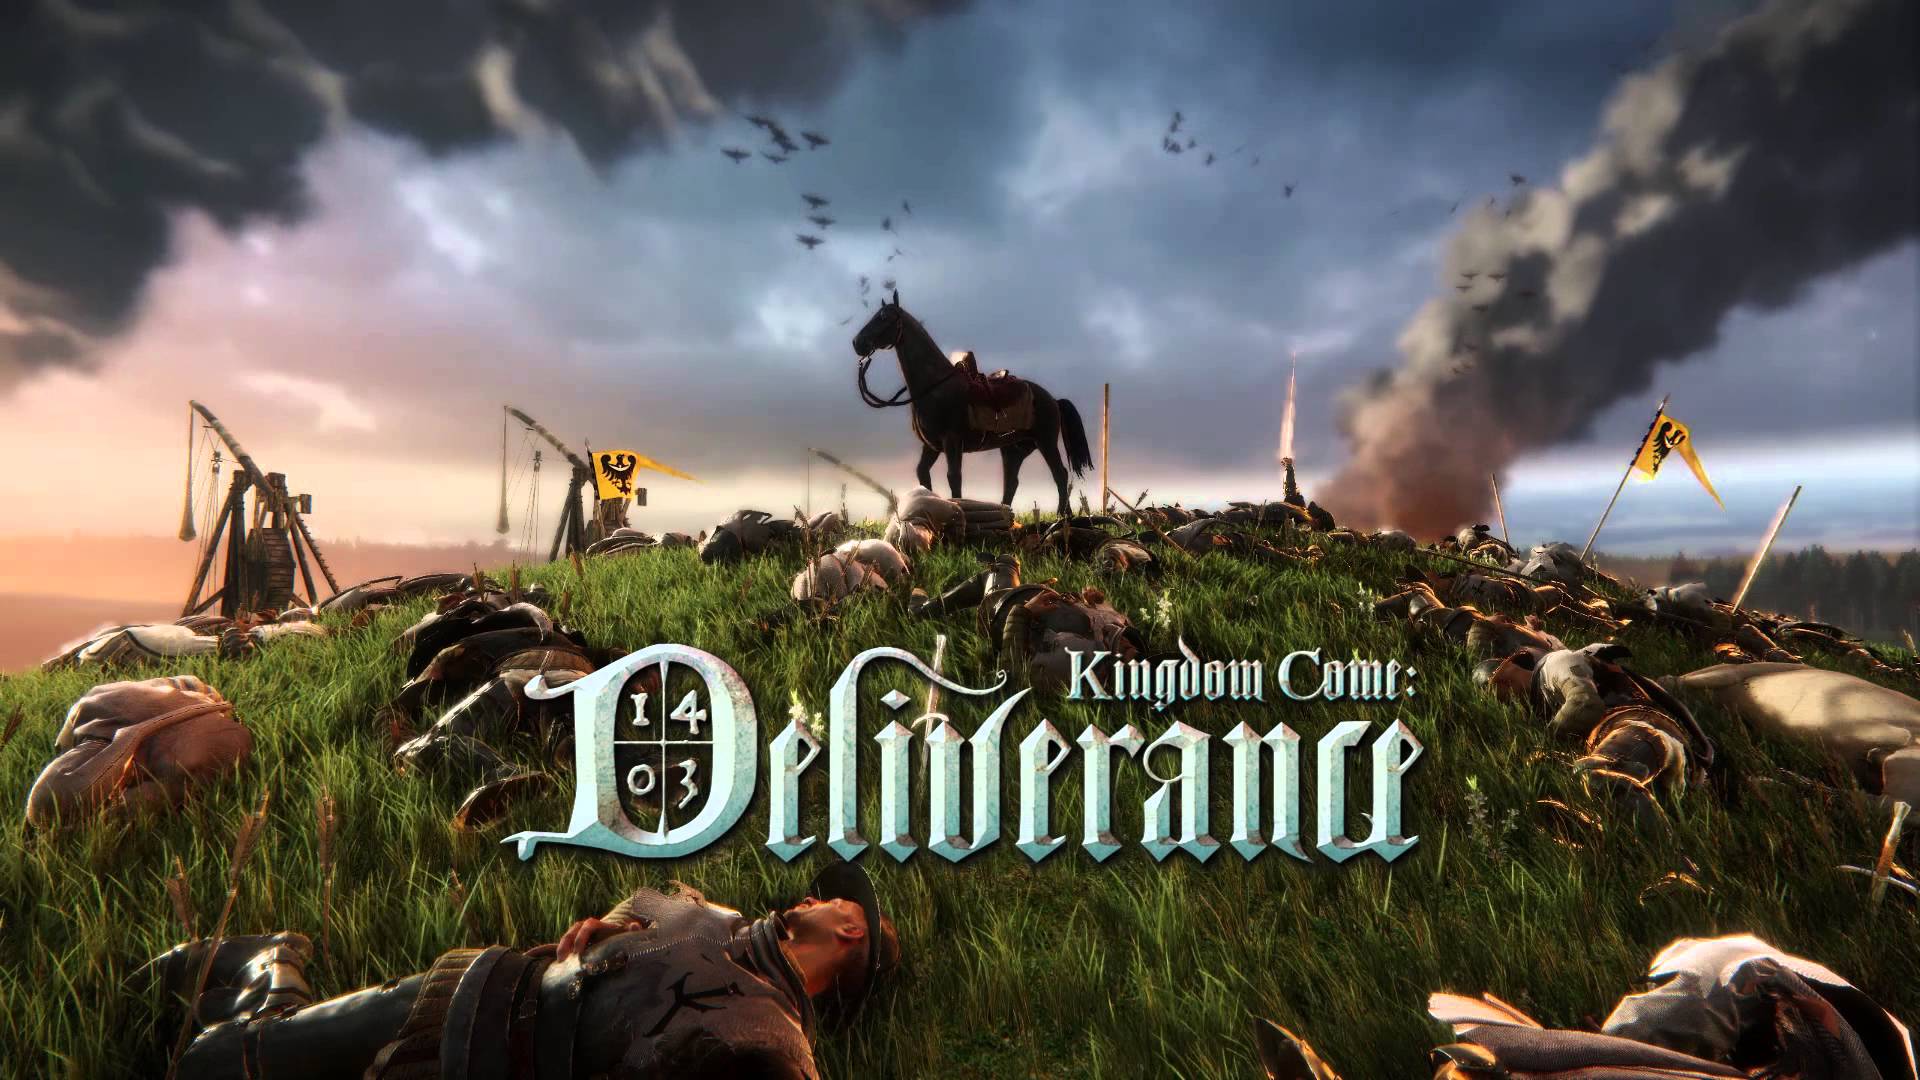 embargo genert Ruin Kingdom Come: Deliverance Royal Edition detailed and dated for Xbox One,  PS4 and PC | TheXboxHub